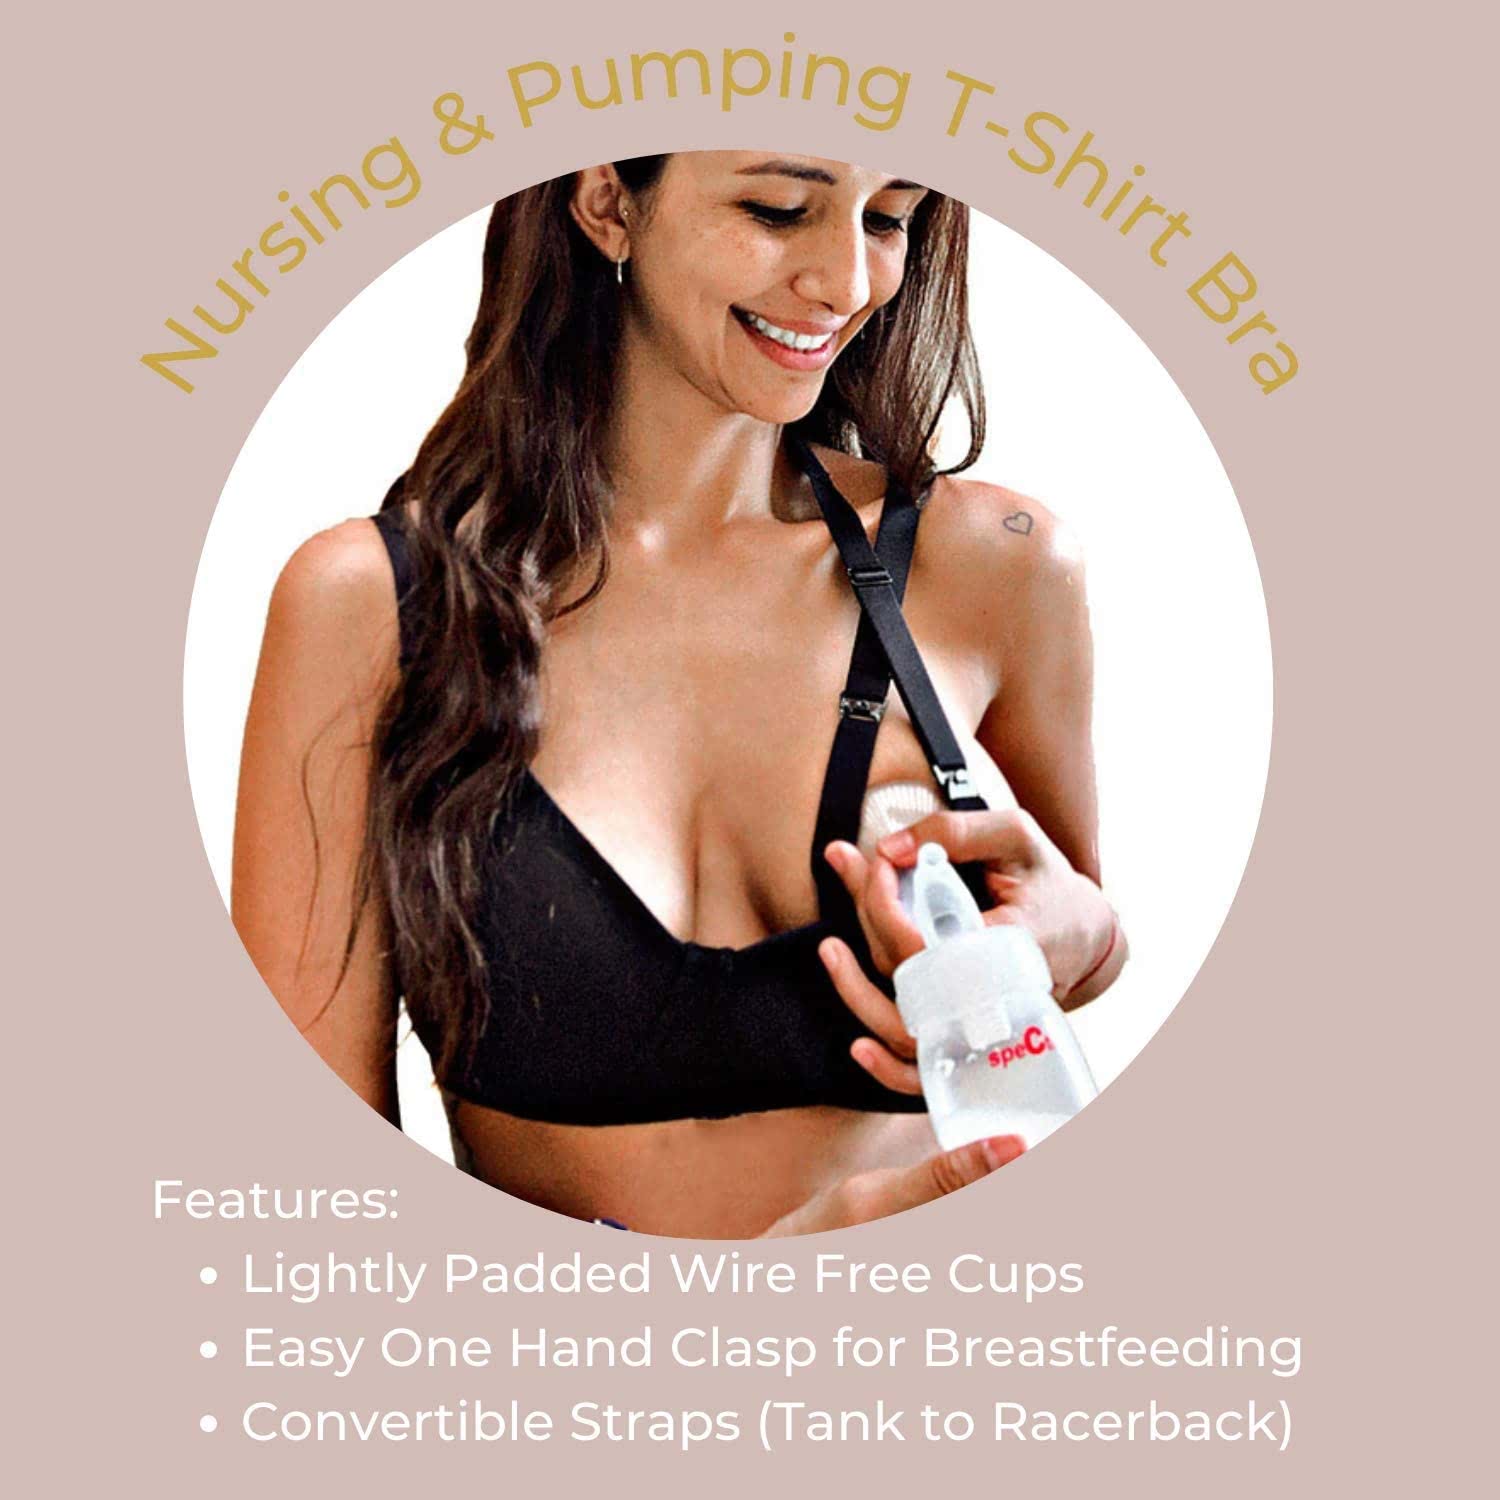 Best Pumping Bra for All-Day Wear - Simple Wishes Convertible Sling Pumping Bra